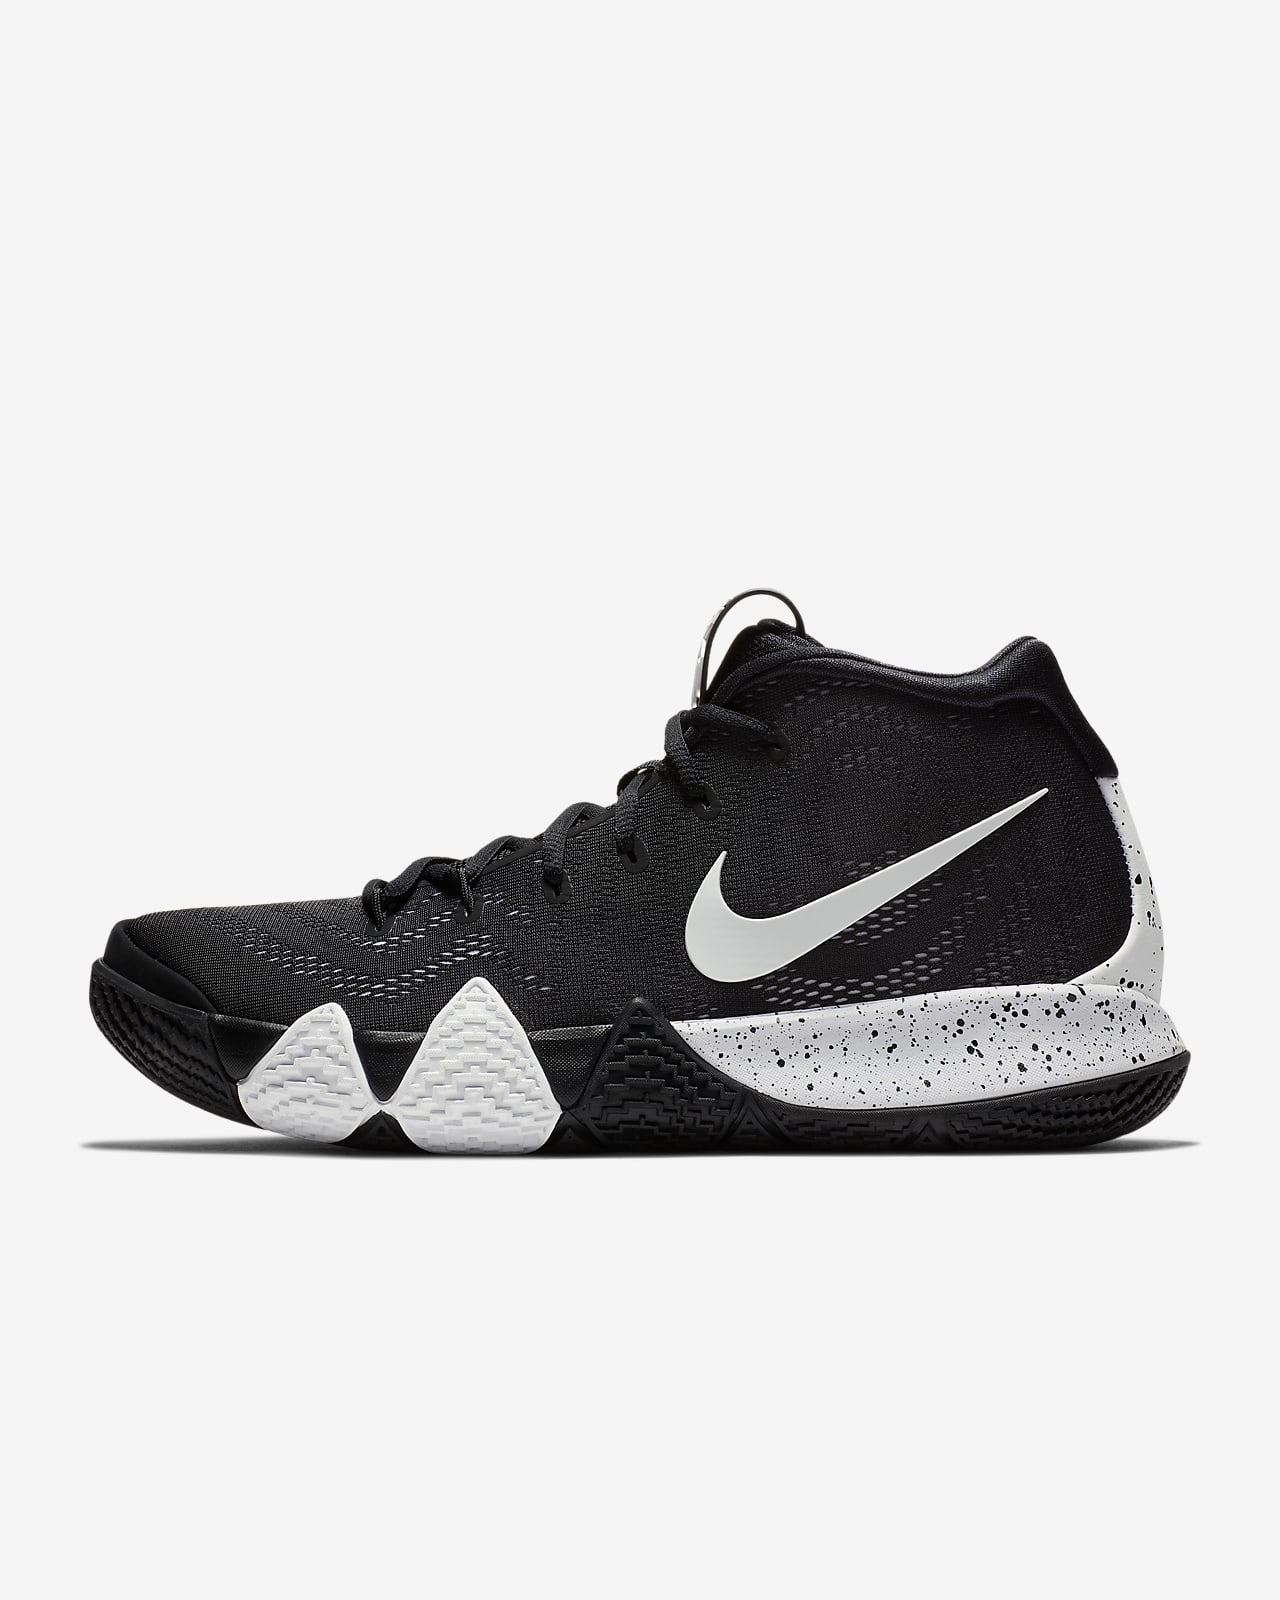 kyrie 4 volleyball